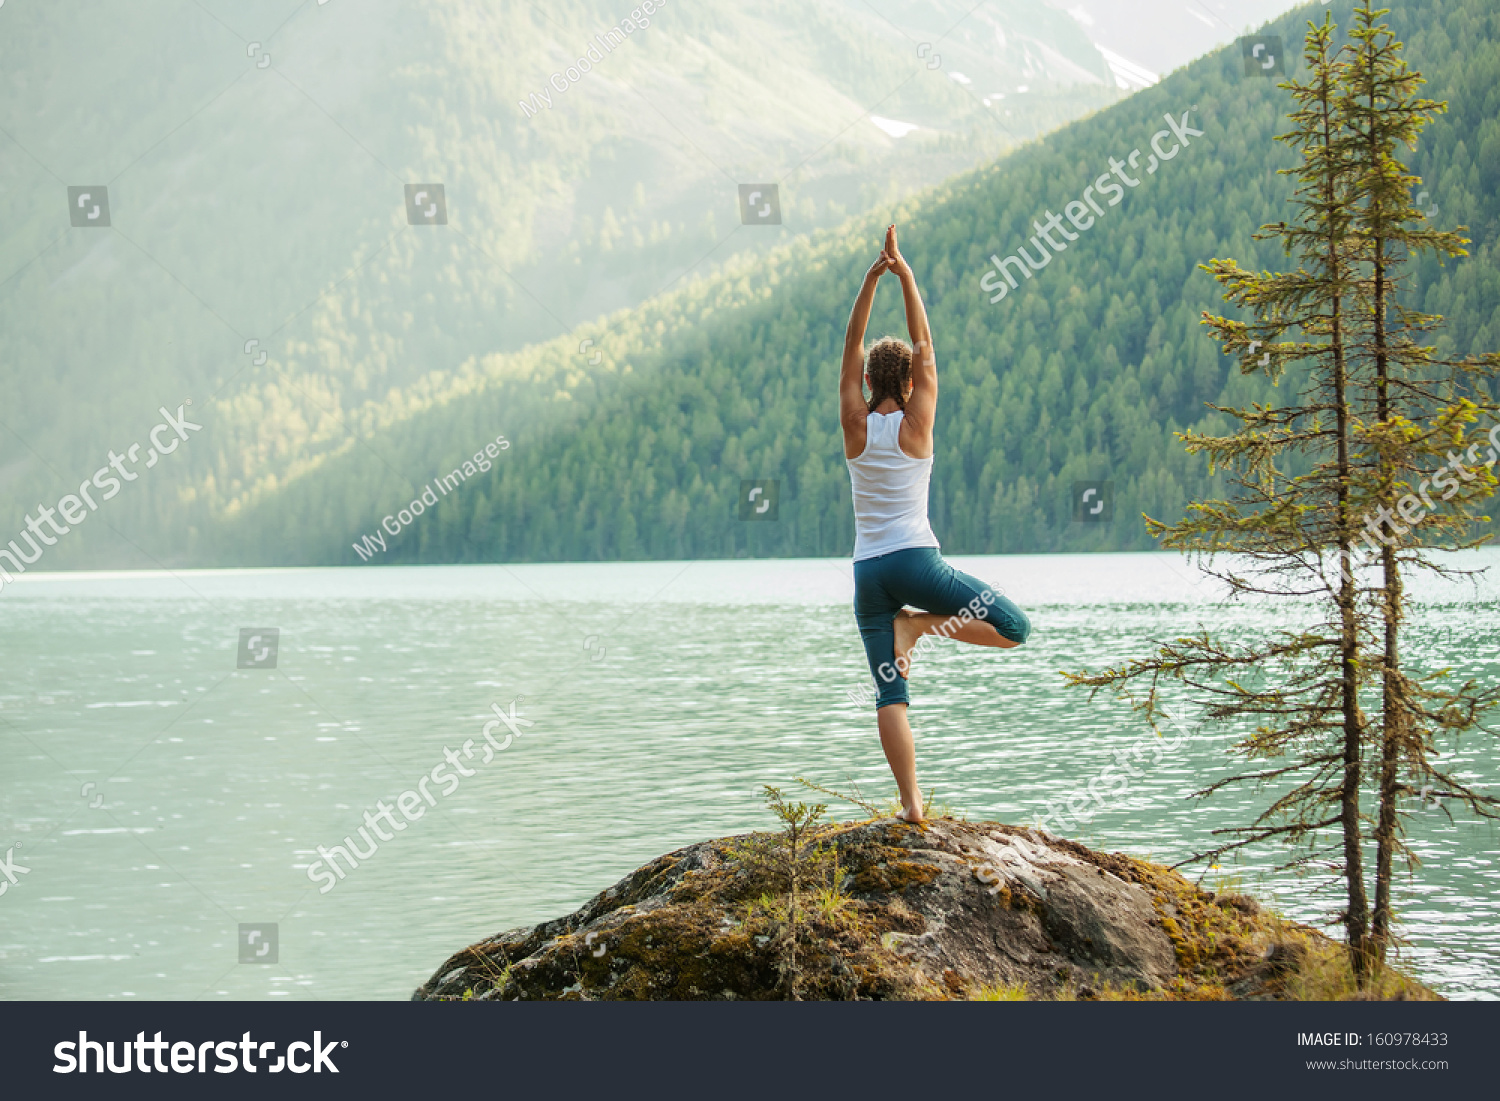 Young woman is practicing yoga at mountain lake #160978433